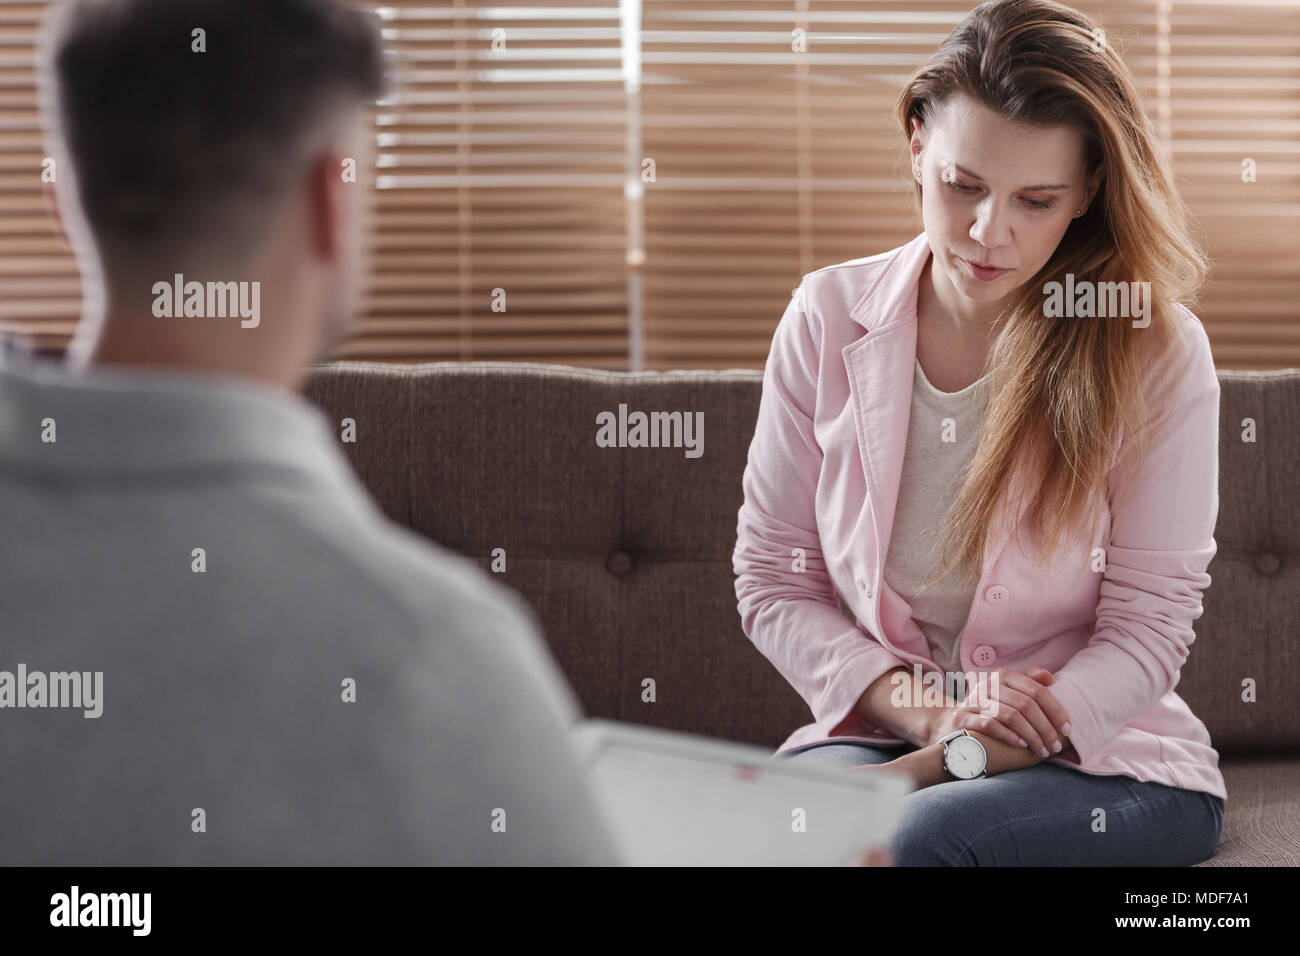 Depressed woman talking to an advisor about a divorce Stock Photo